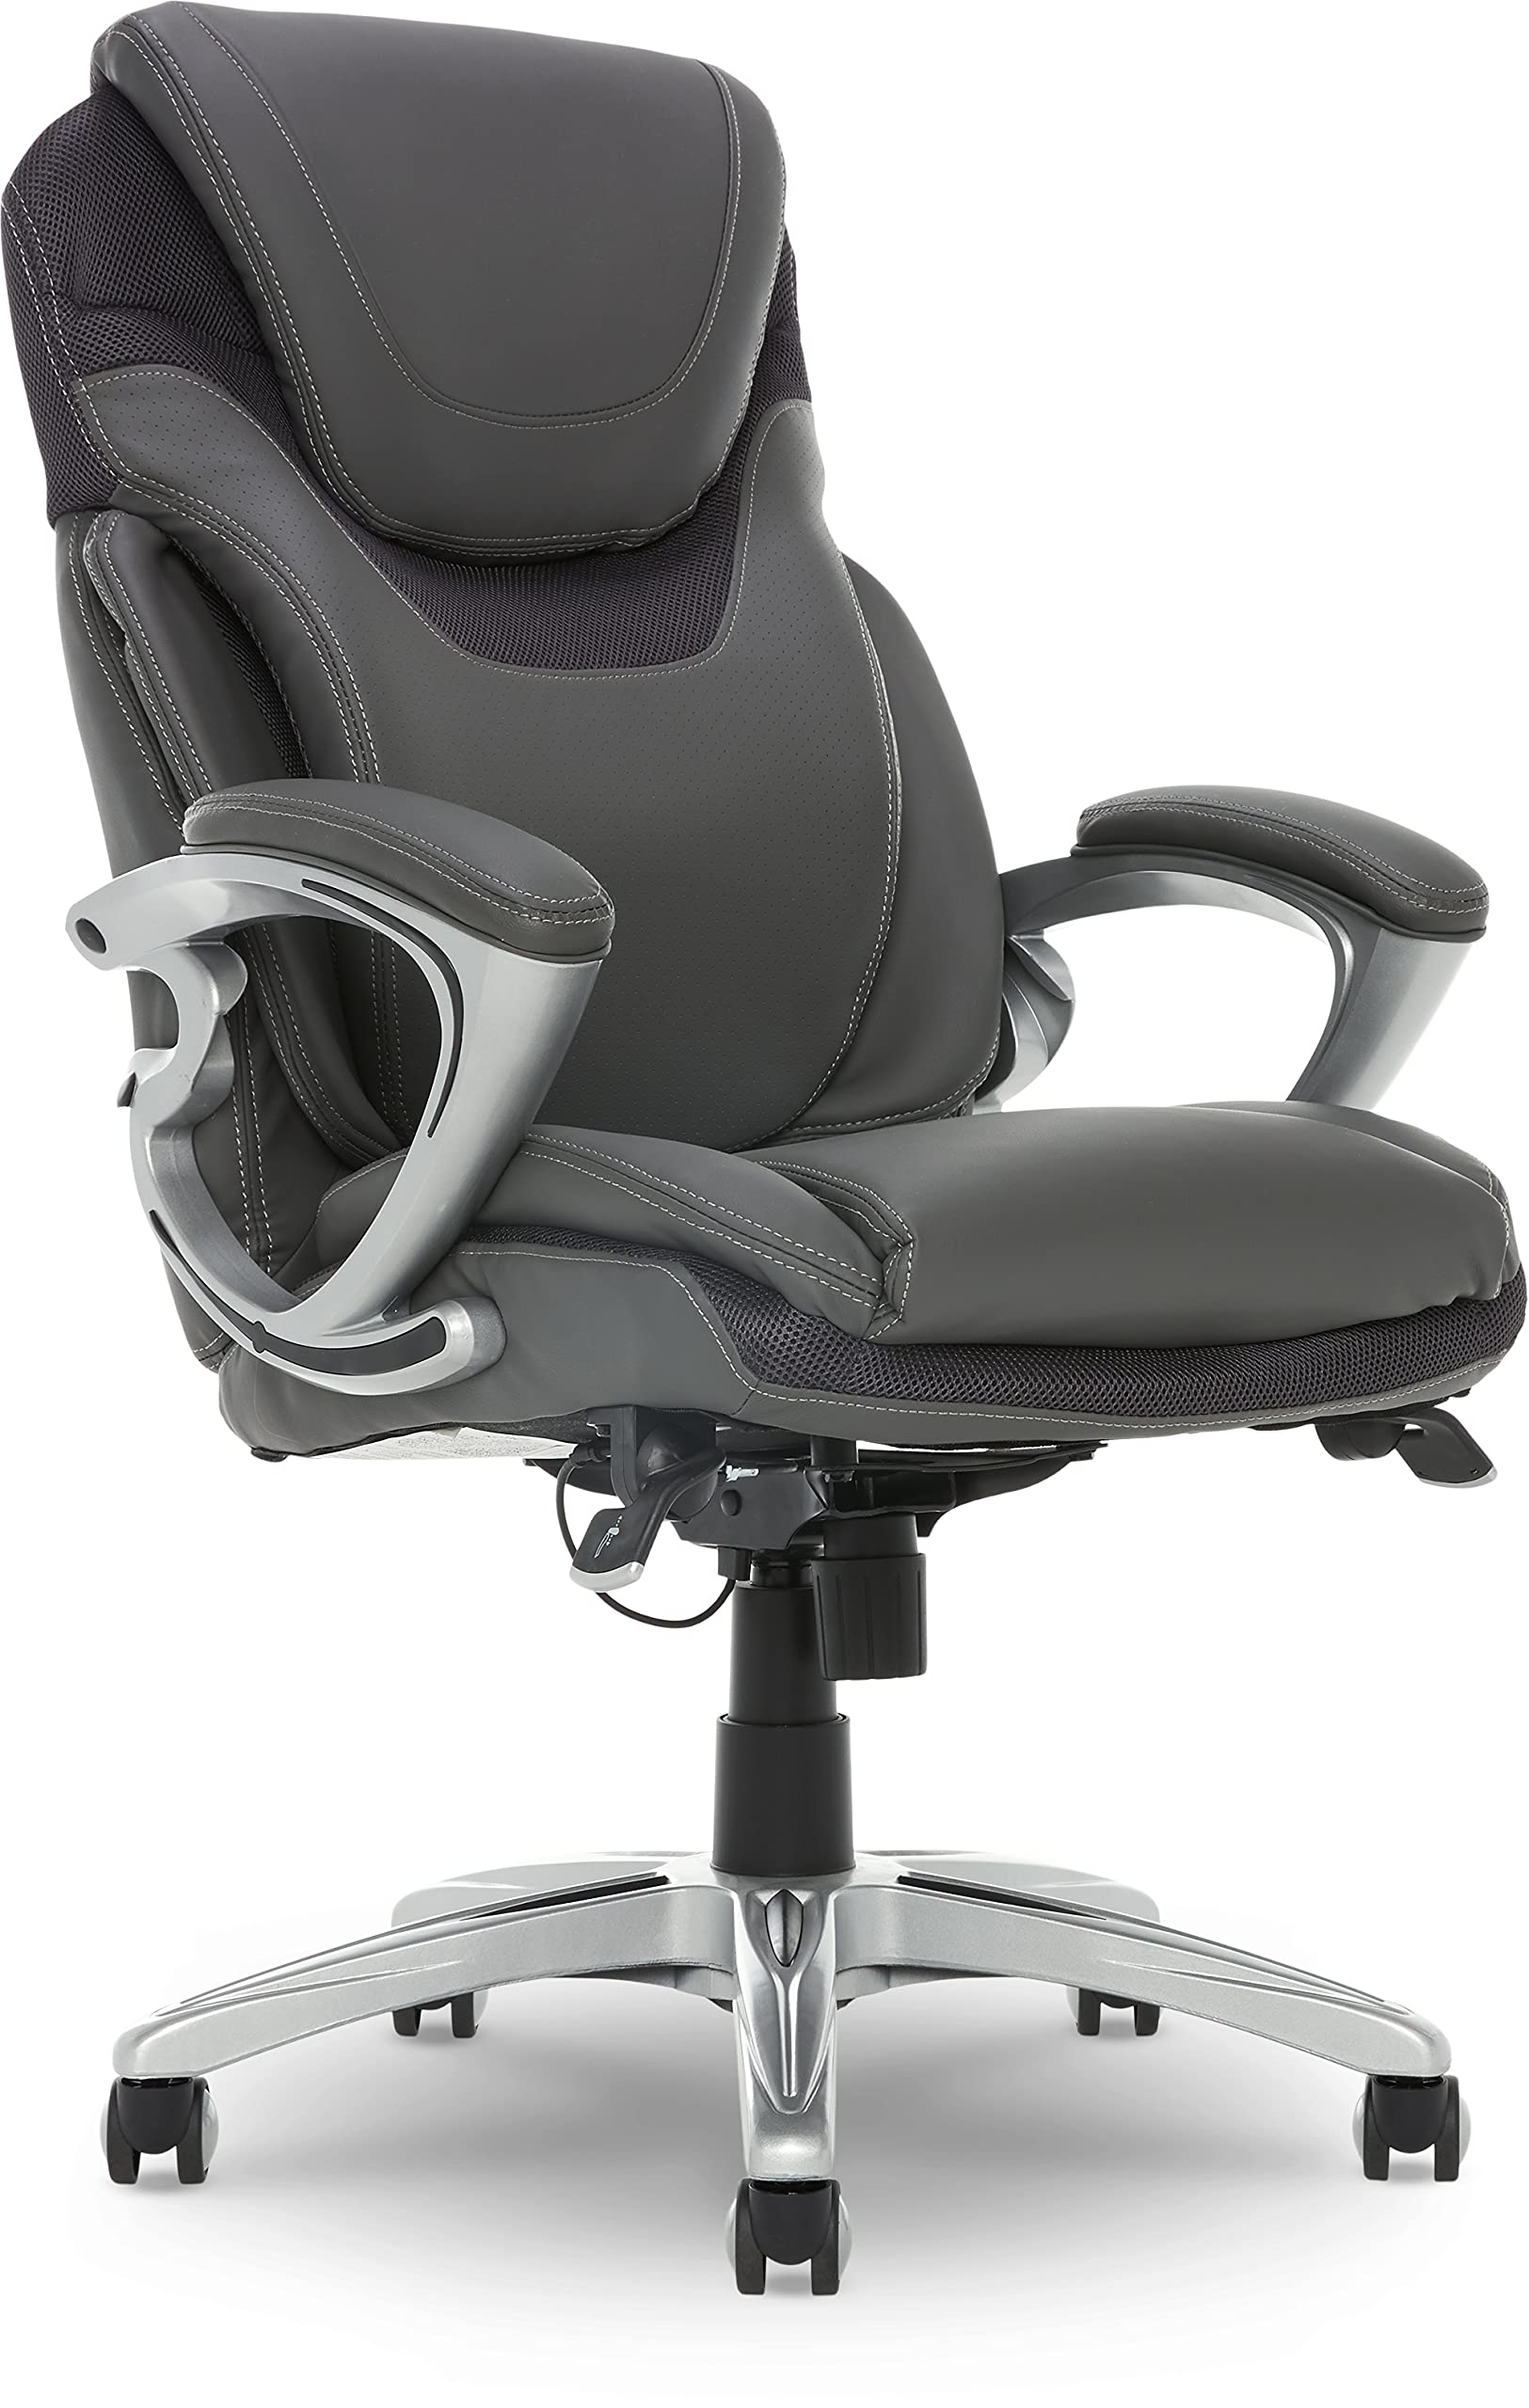 Serta Style Leighton Home Office Chair - Gray Bonded Leather